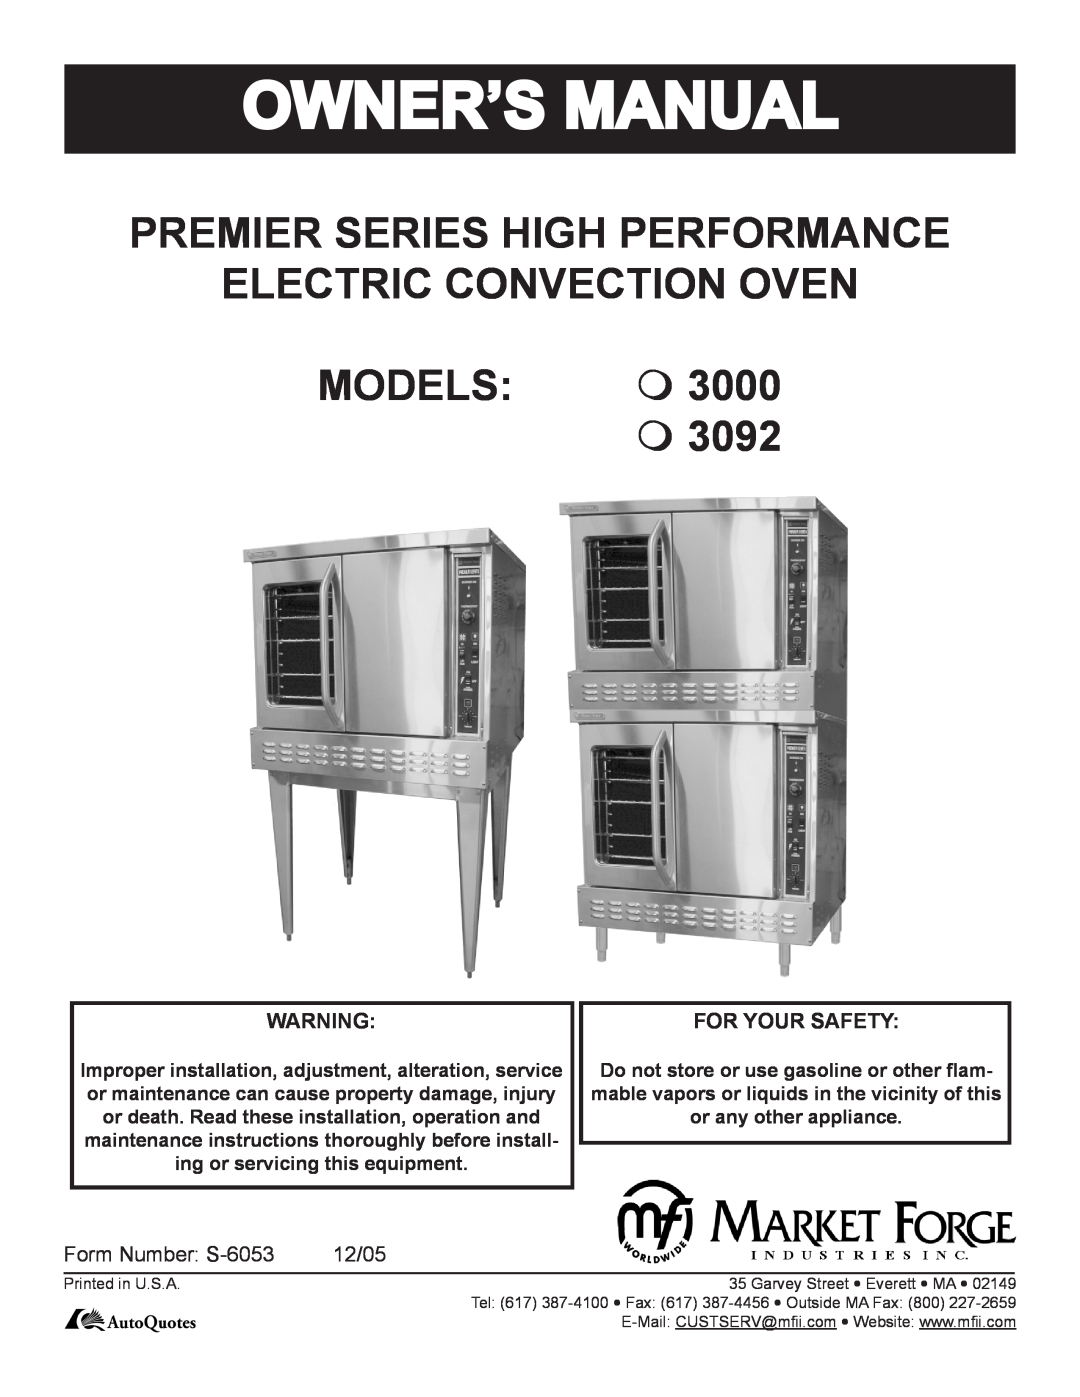 Market Forge Industries M 3000 owner manual For Your Safety, Premier Series High Performance, Electric Convection Oven 